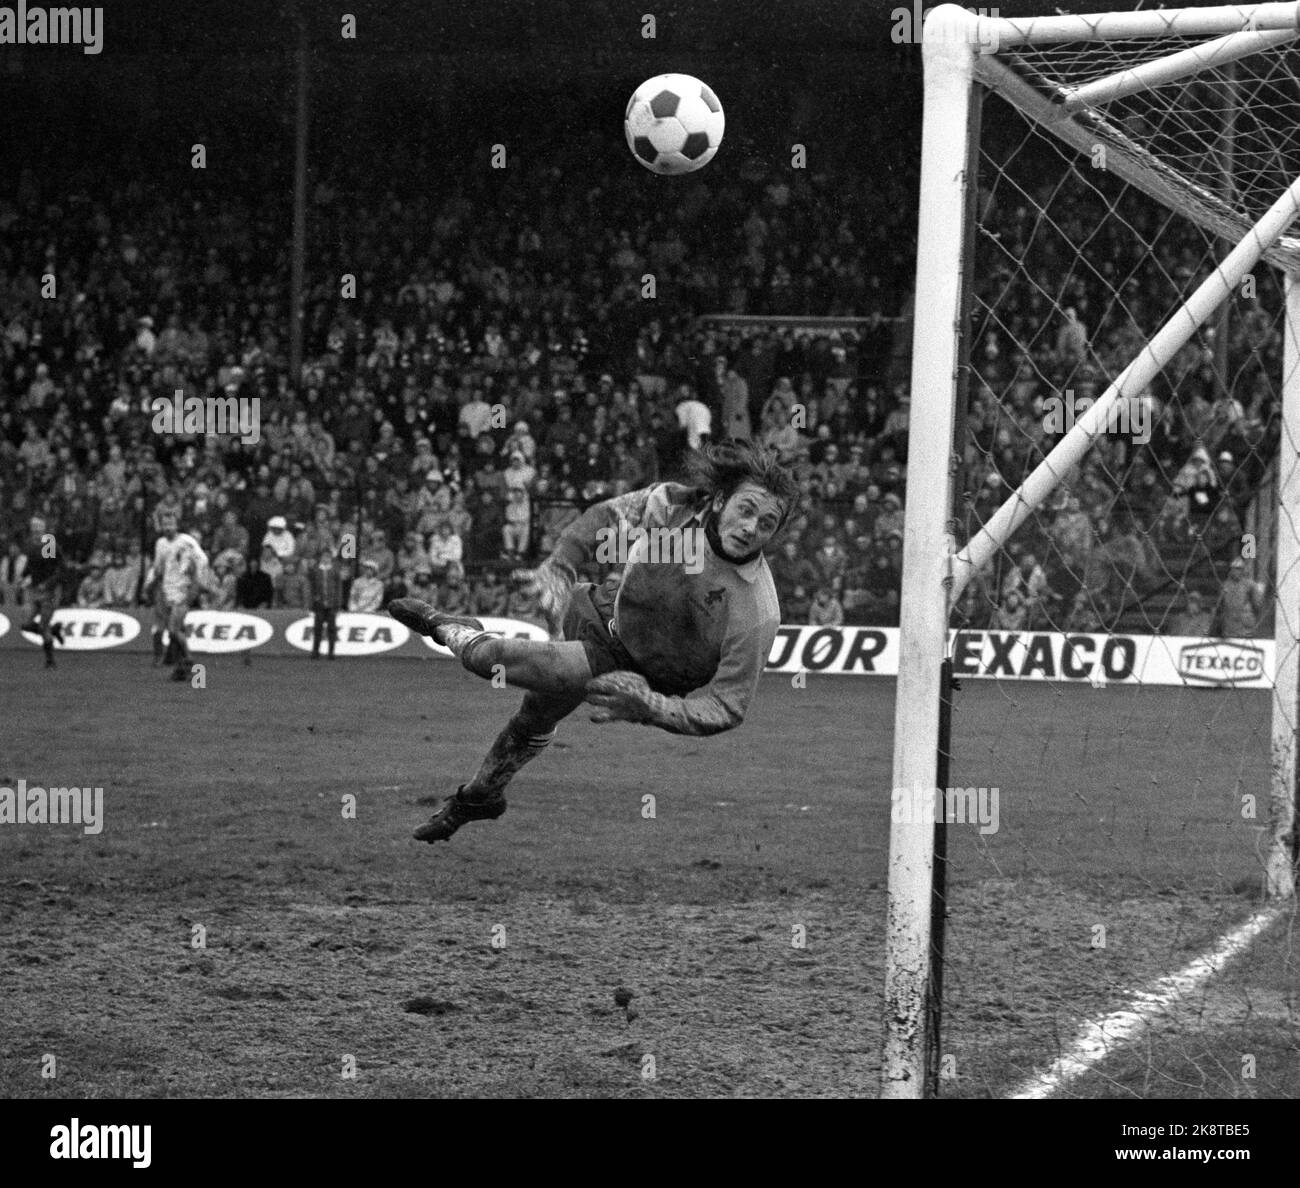 Oslo 19741020. Soccer. Cup final Skeid - Viking 3-1, Ullevaal Stadium. Skeid became Norwegian champions in the rain and sleet. In the picture Vikings keeper Erik Johannessen in action. Photo NTB / NTB Stock Photo